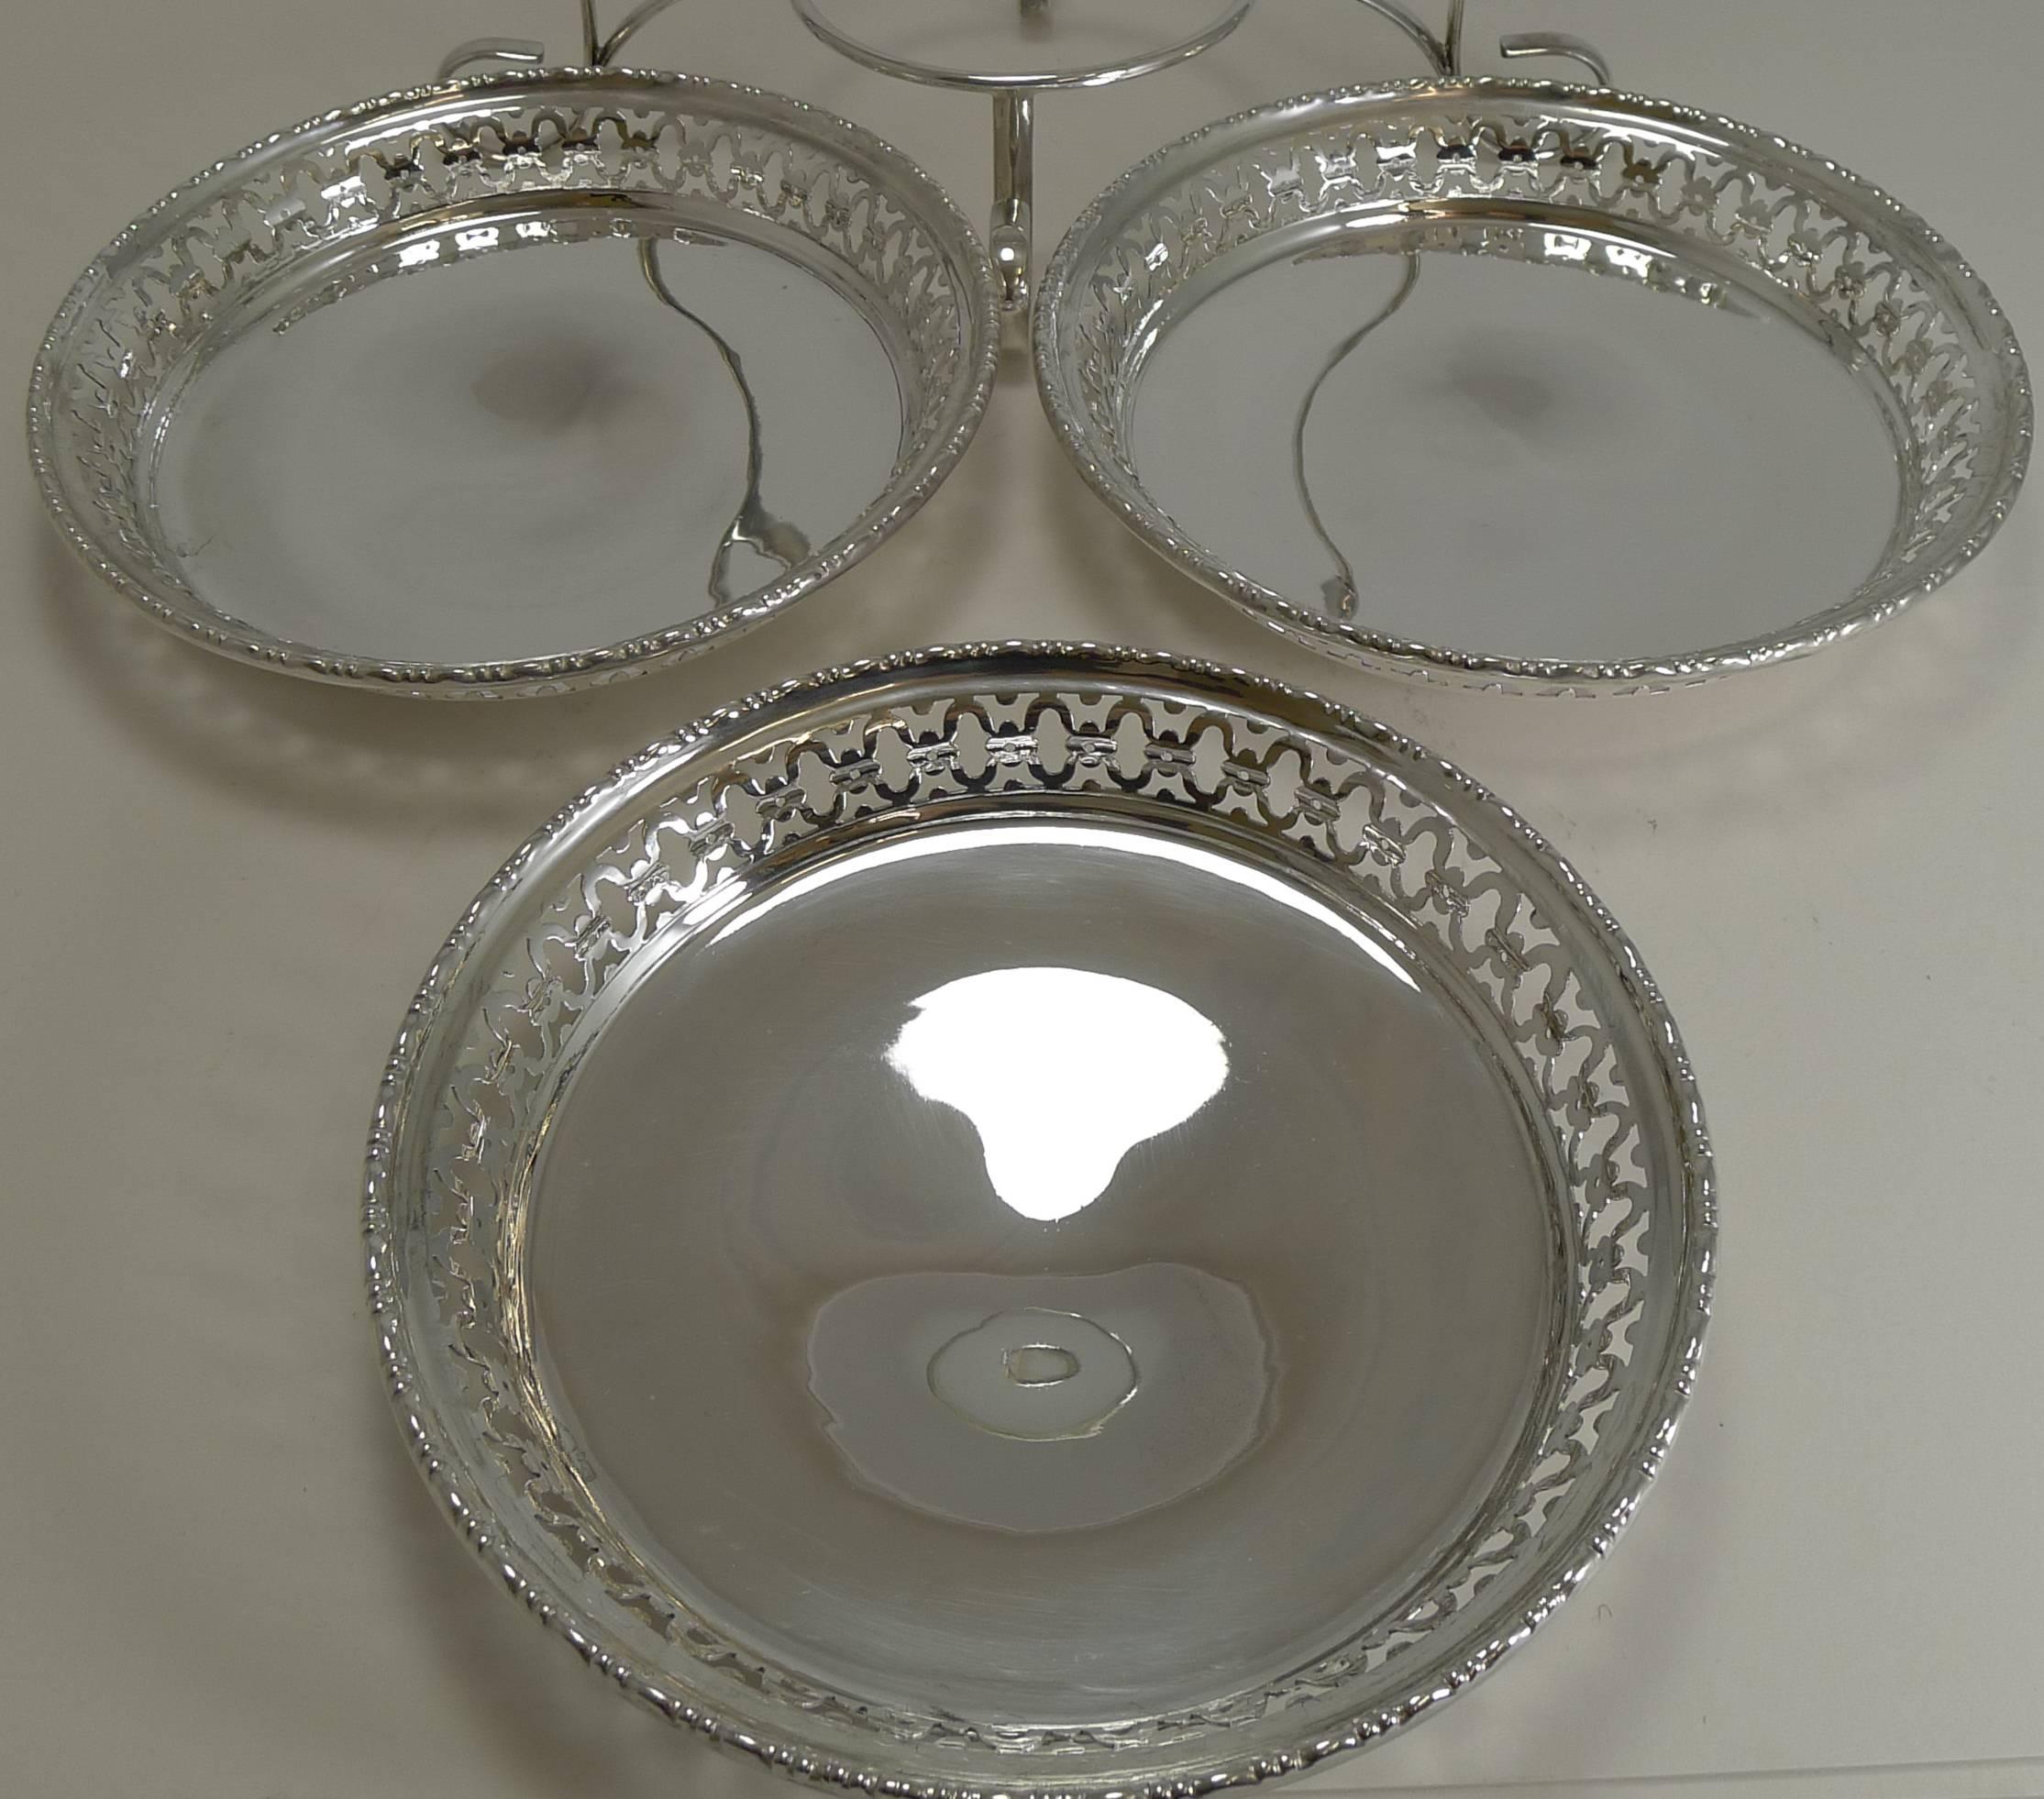 Early 20th Century Antique English Cake Stand in Silver Plate, circa 1900